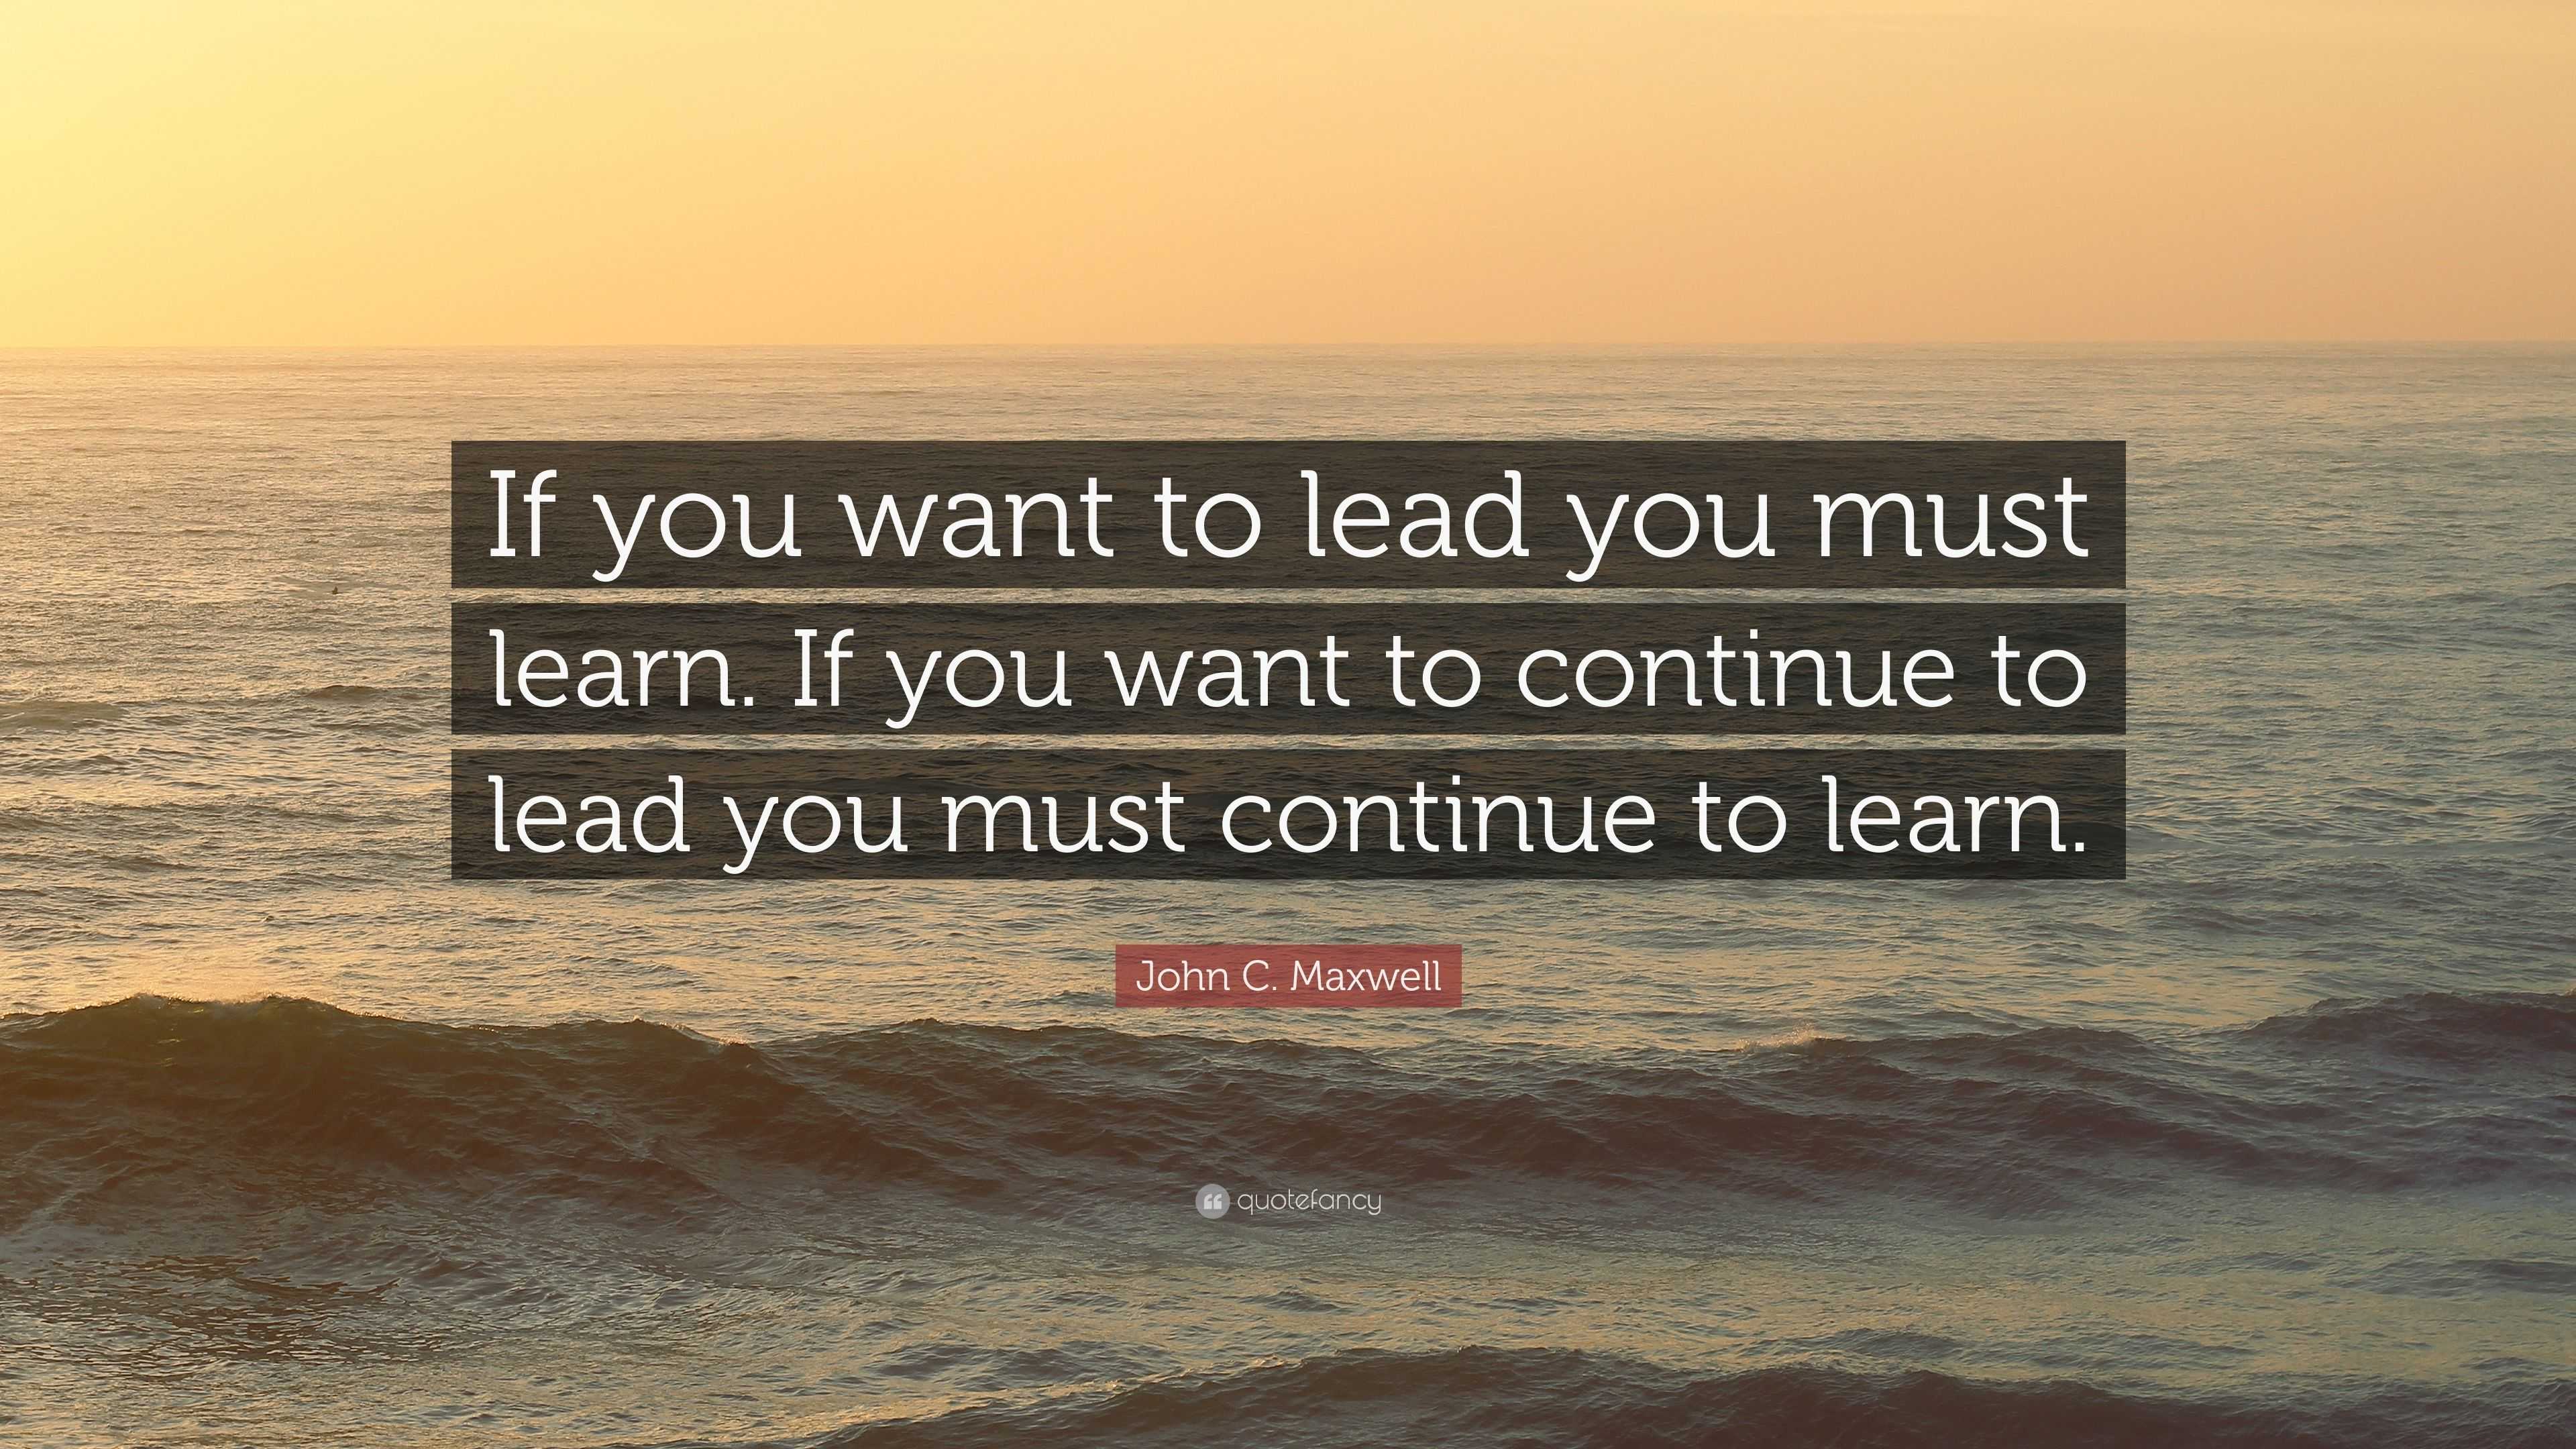 John C Maxwell Quote If You Want To Lead You Must Learn If You Want To